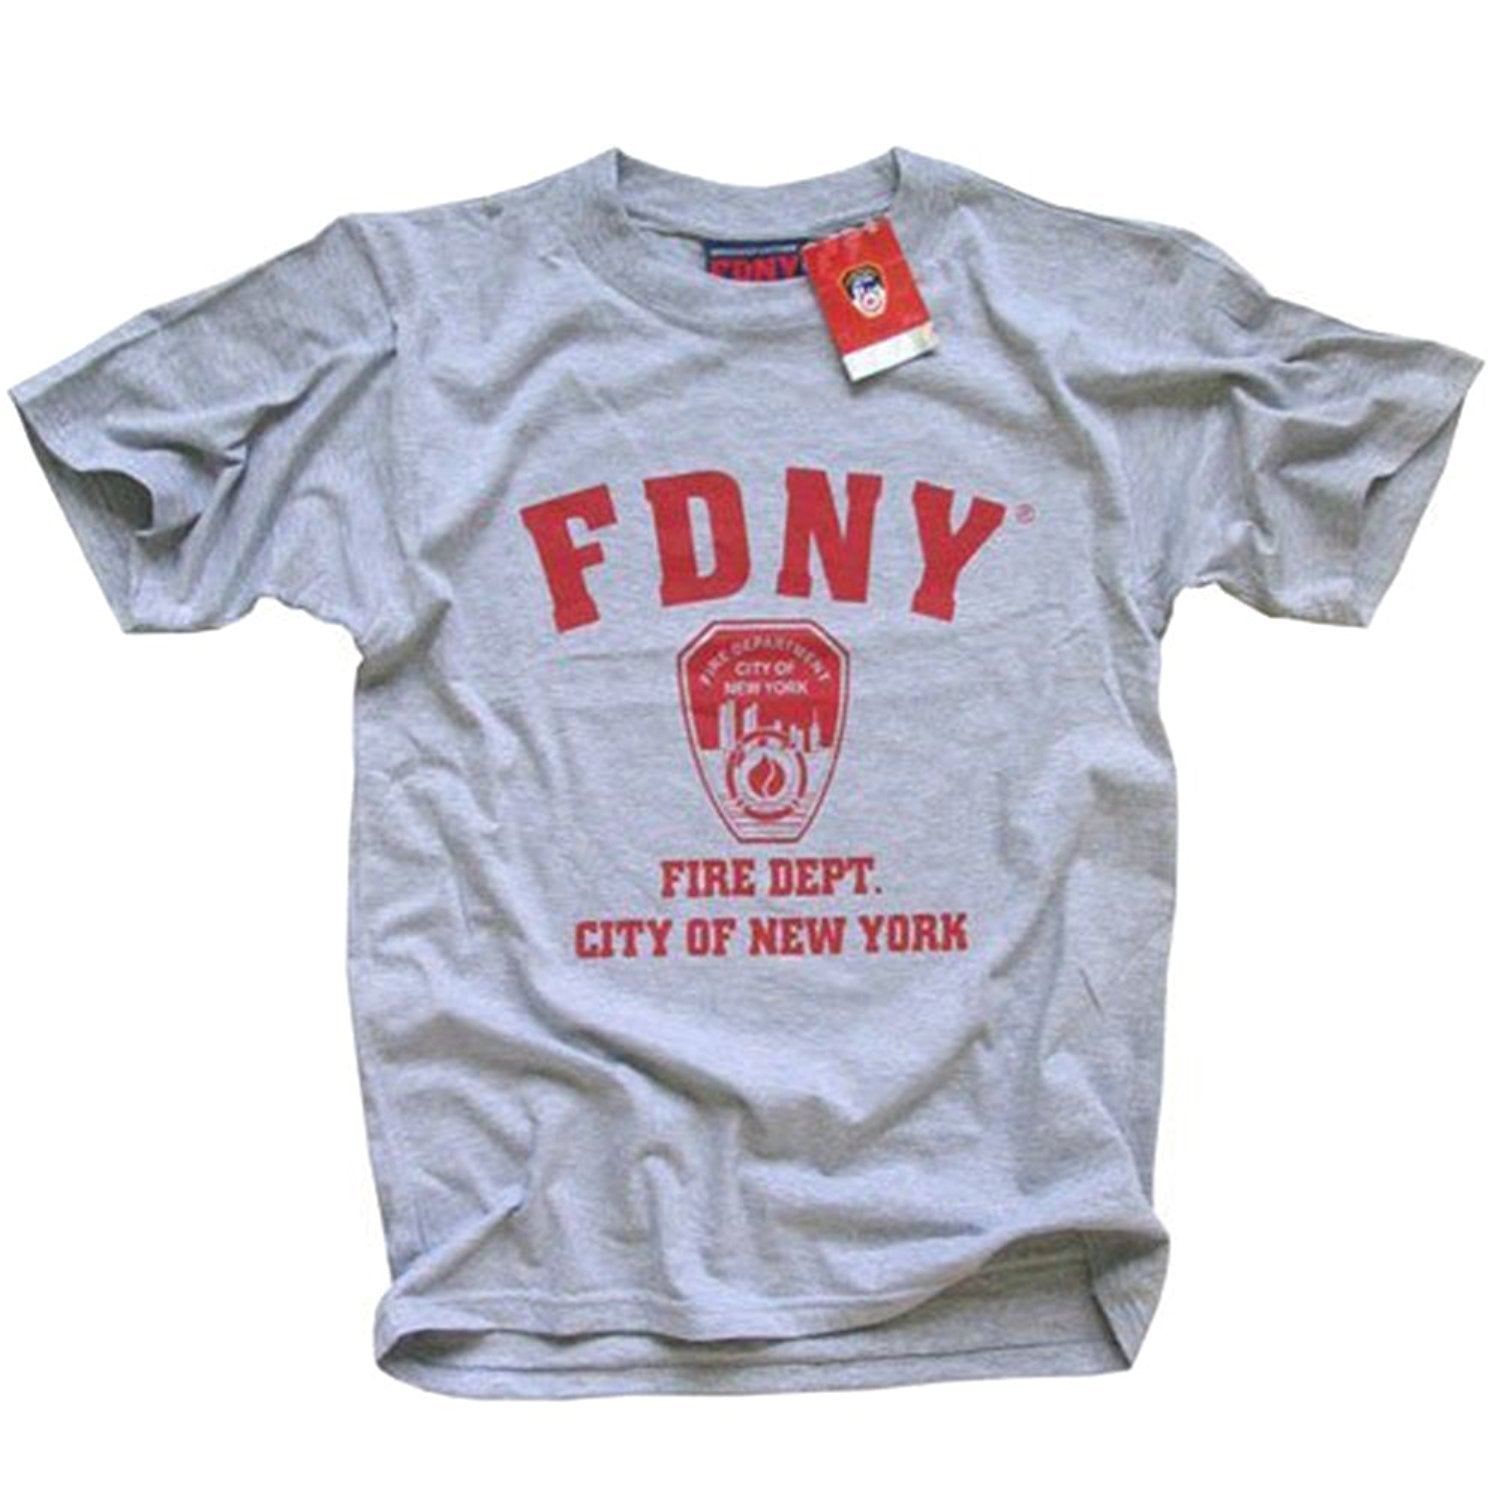 FDNY Shirt T-Shirt Embroidered Logo Size L